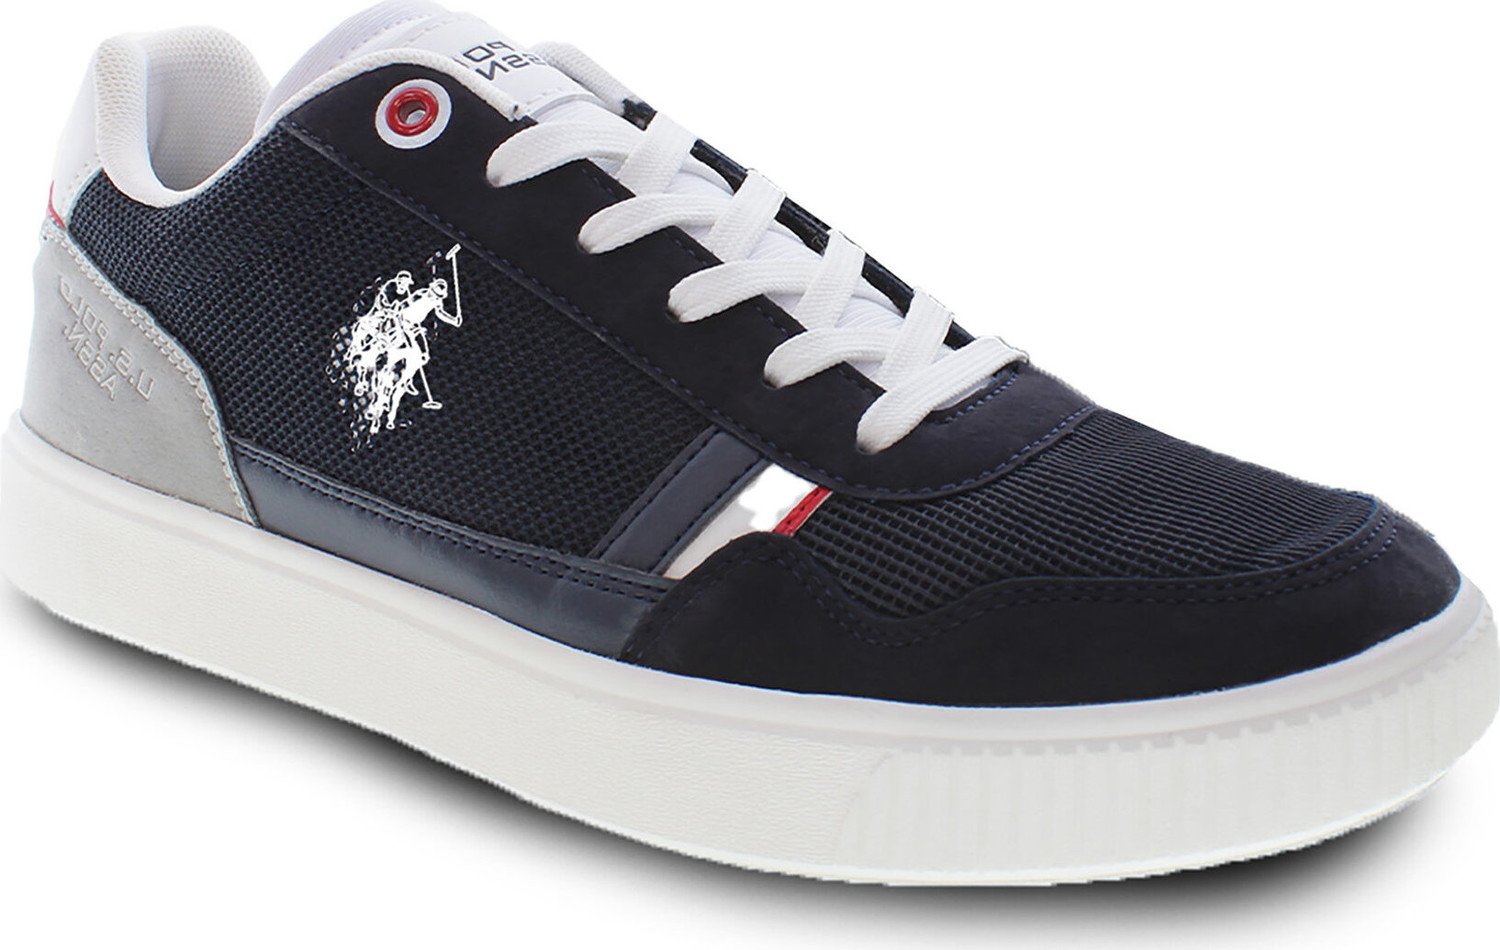 Sneakersy U.S. Polo Assn. Tymes TYMES001A DBL001